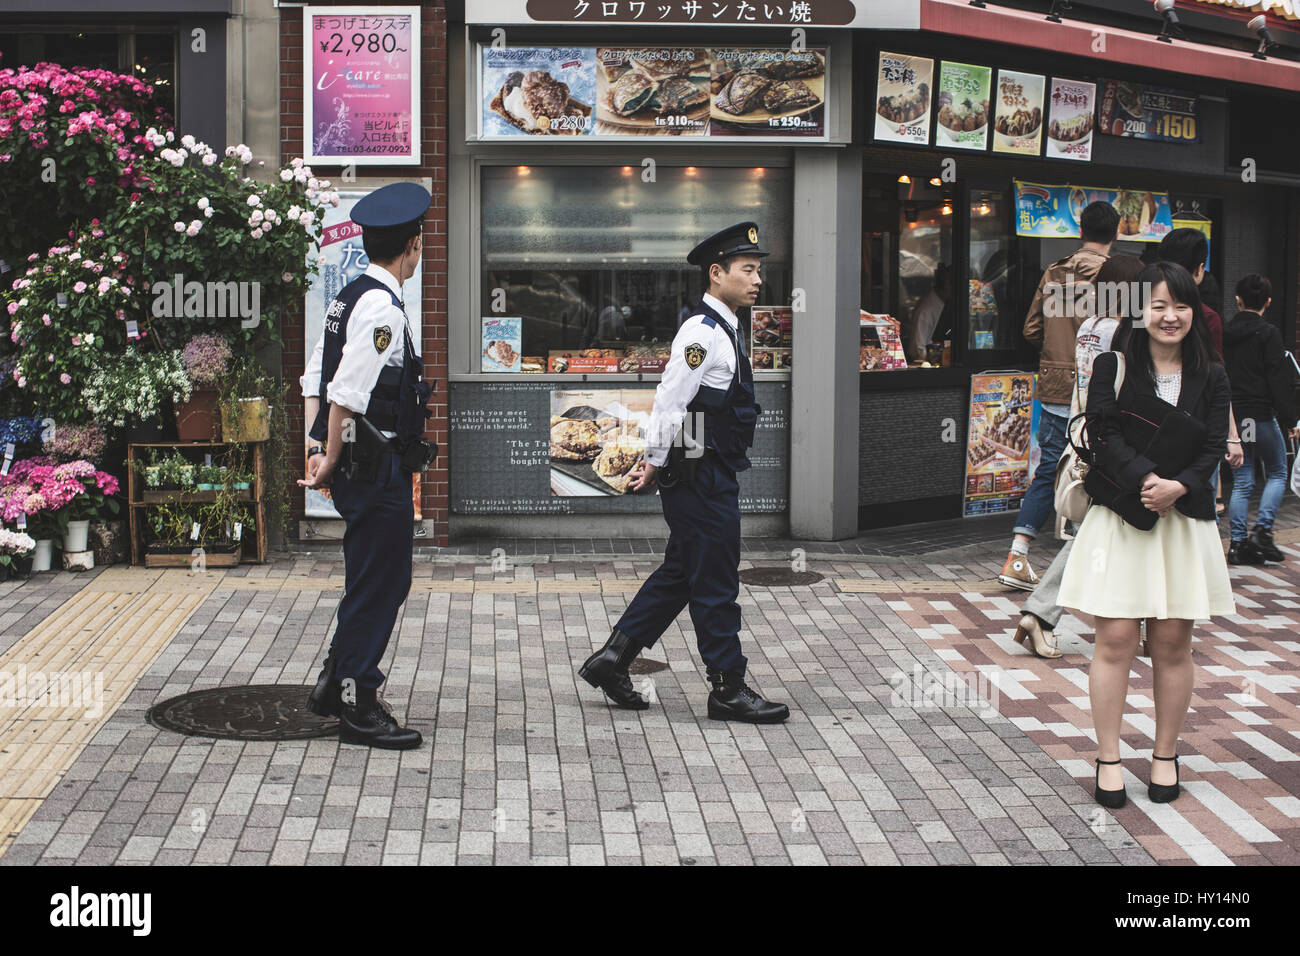 Two police officers on a street in Tokyo, Japan. Stock Photo